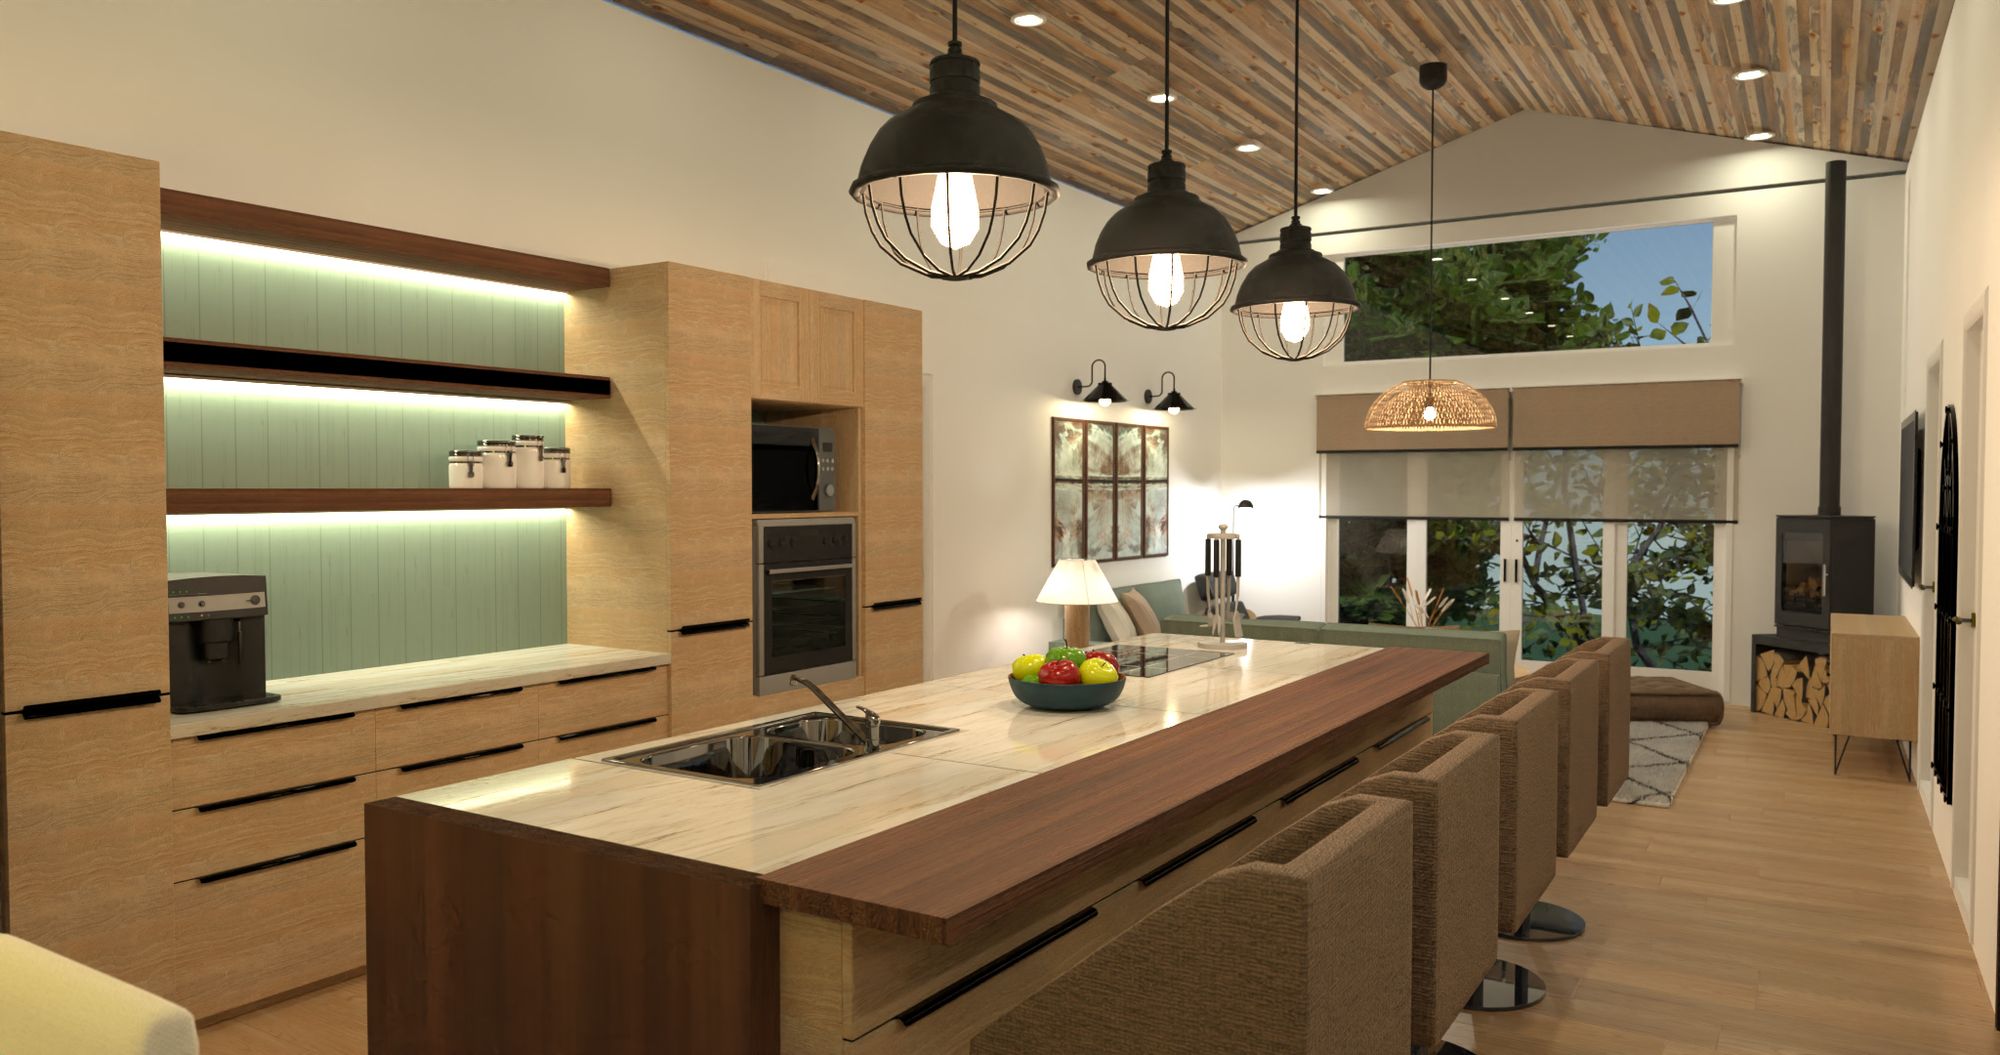 House Planning: How to Set Up Your Kitchen